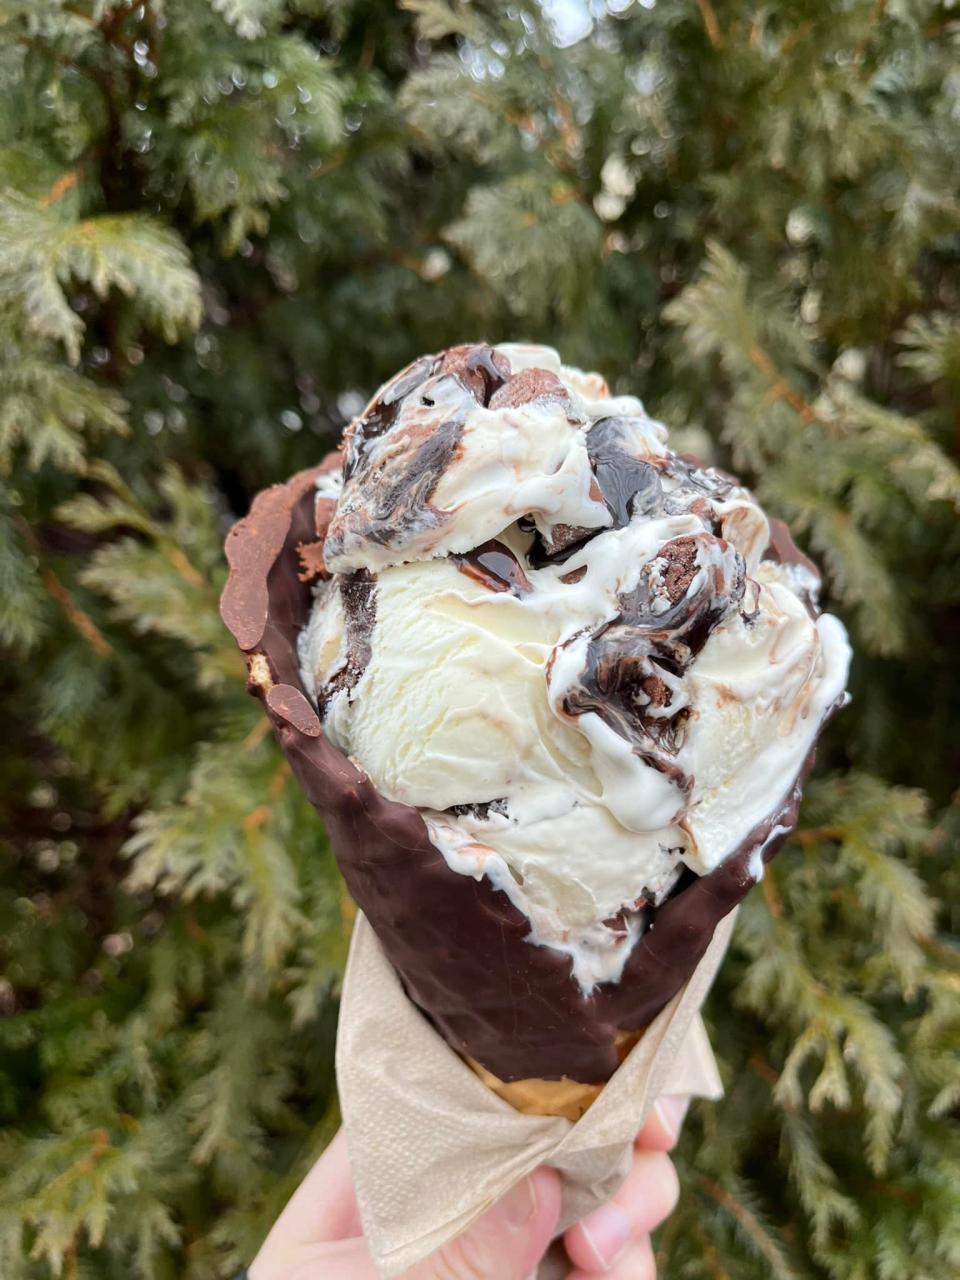 “Mint to be” at Acushnet Creamery.